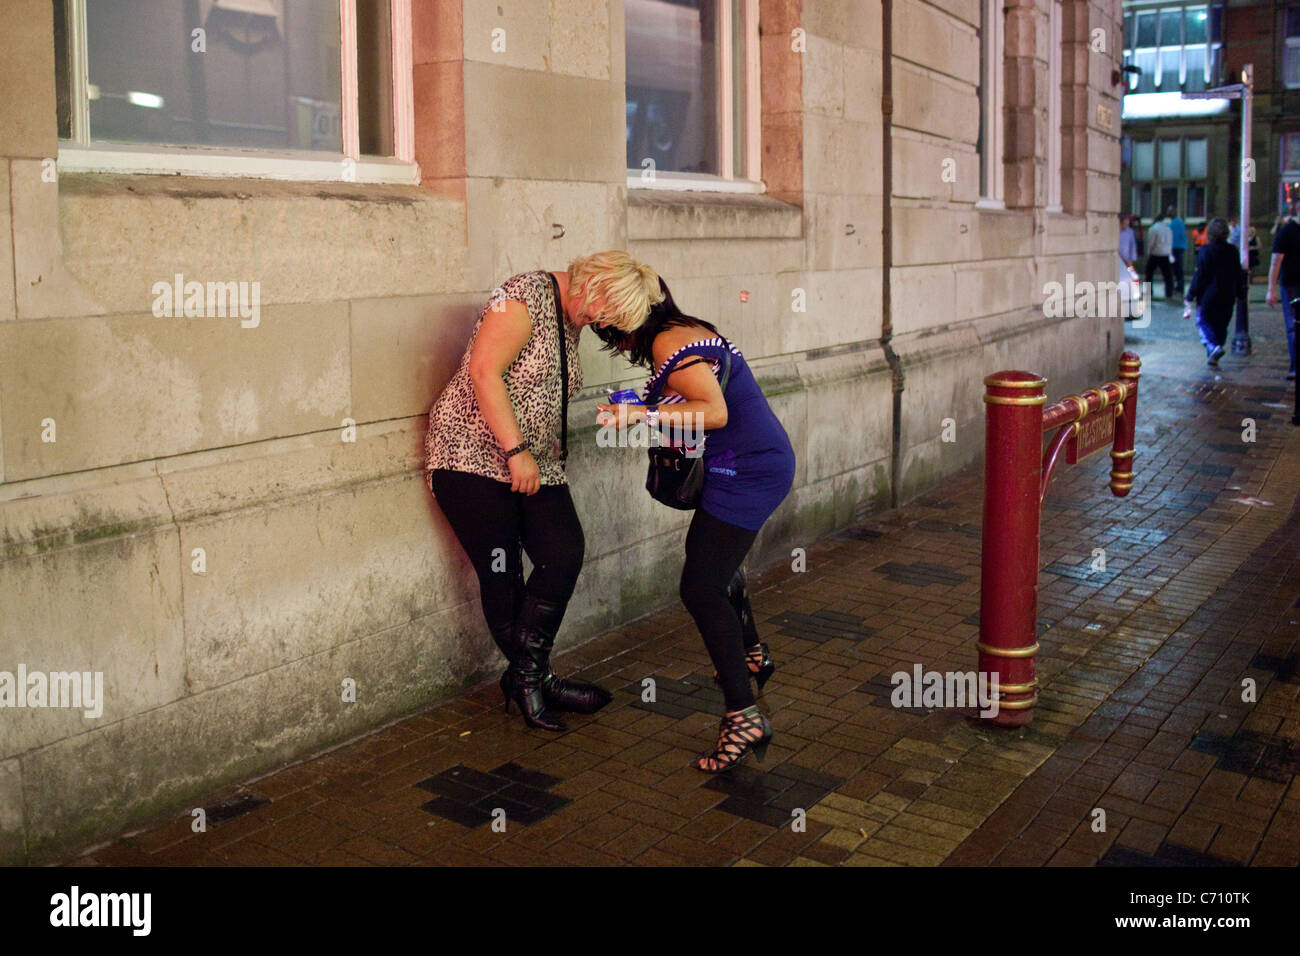 Two women urinate thorough their clothes outside one of the c photo